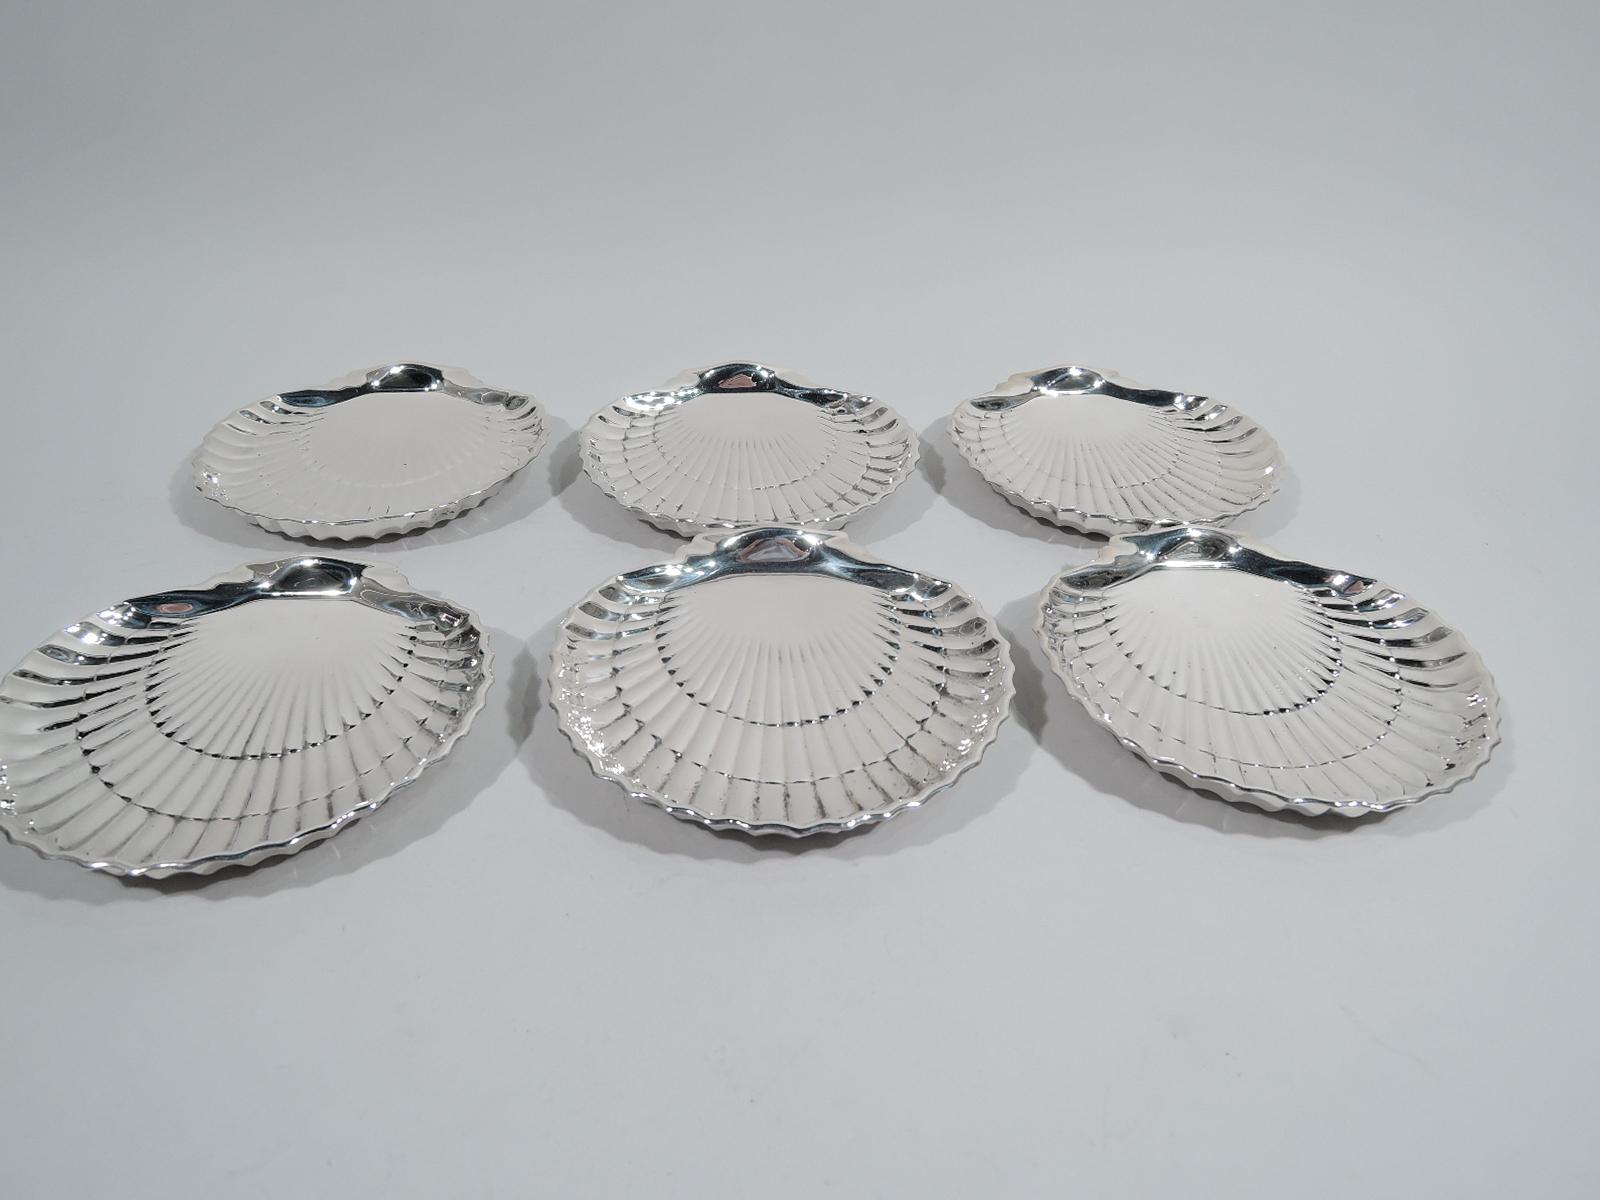 Set of 6 sterling silver seafood scallop shell plates. Made by Gorham in Providence. Each: straight and tiered flutes, scalloped rim, and 2 ball supports. The hard-to-find size for the new era of small dinner parties. Fully marked and numbered